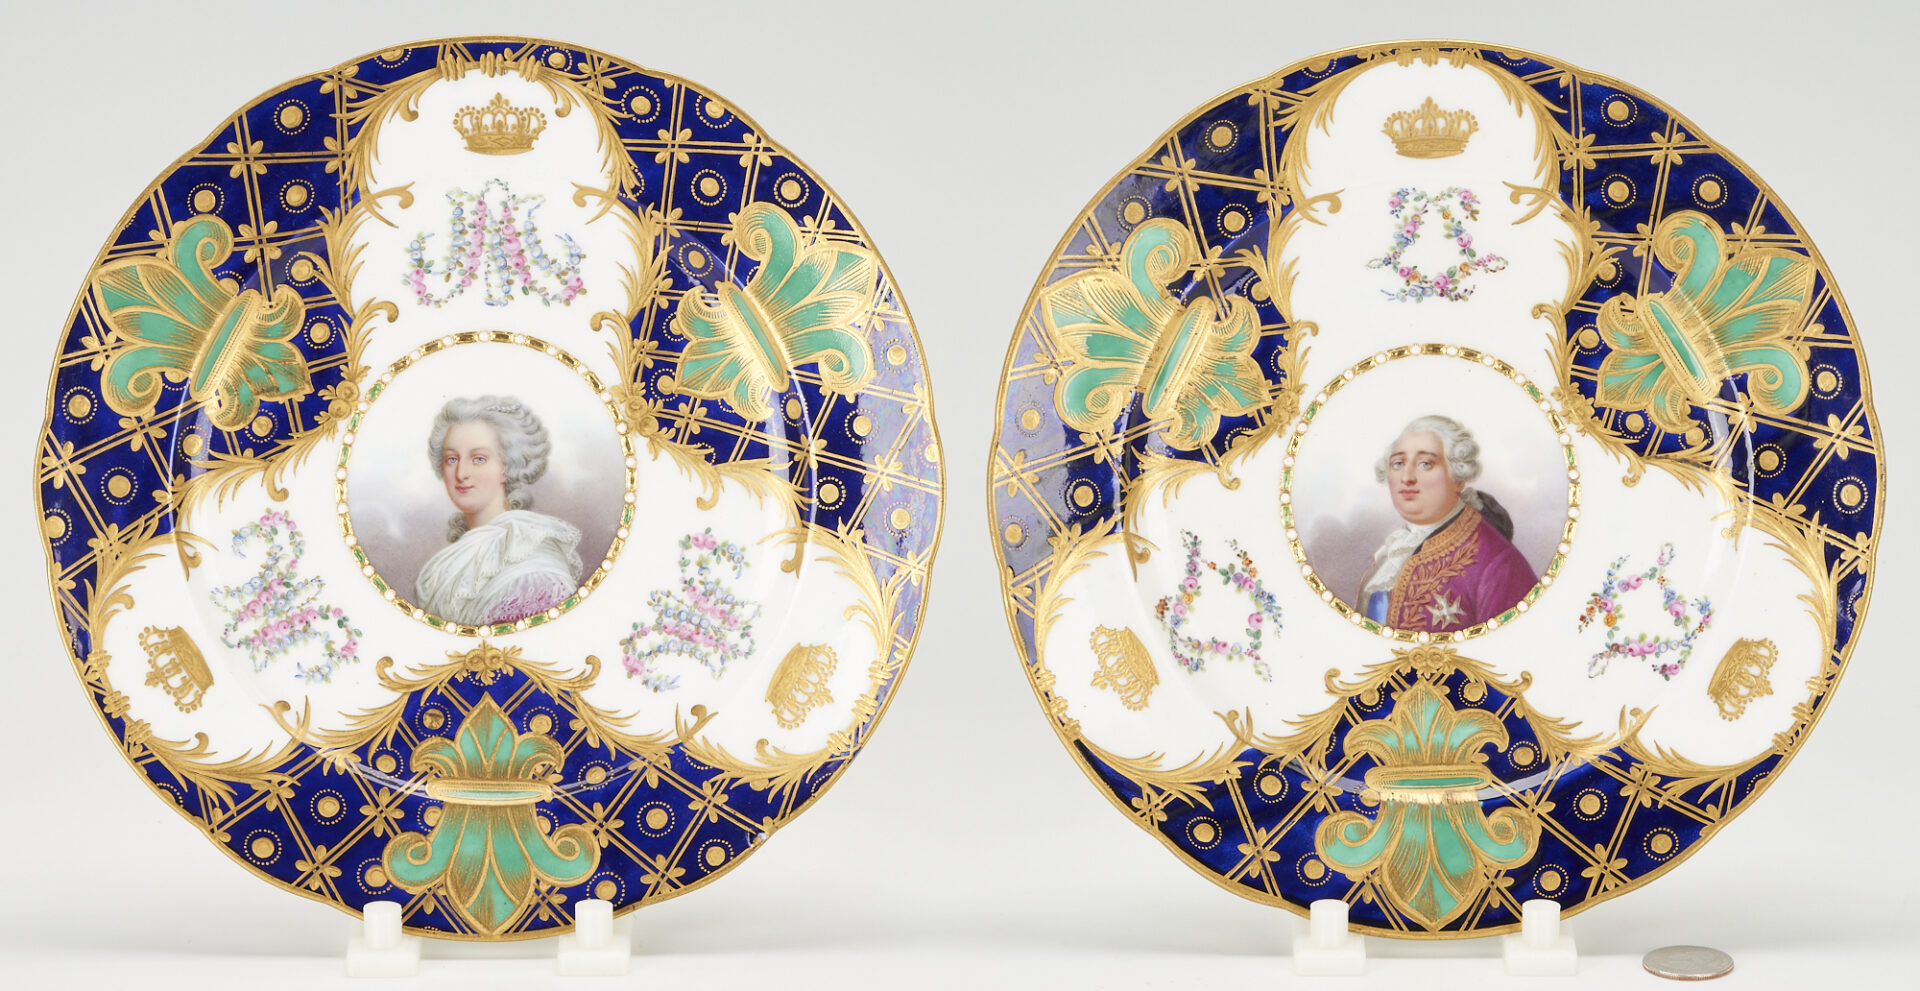 Lot 277: 5 pcs. Sevres or Sevres Style French Cobalt Porcelain, incl. After David Teniers The Younger